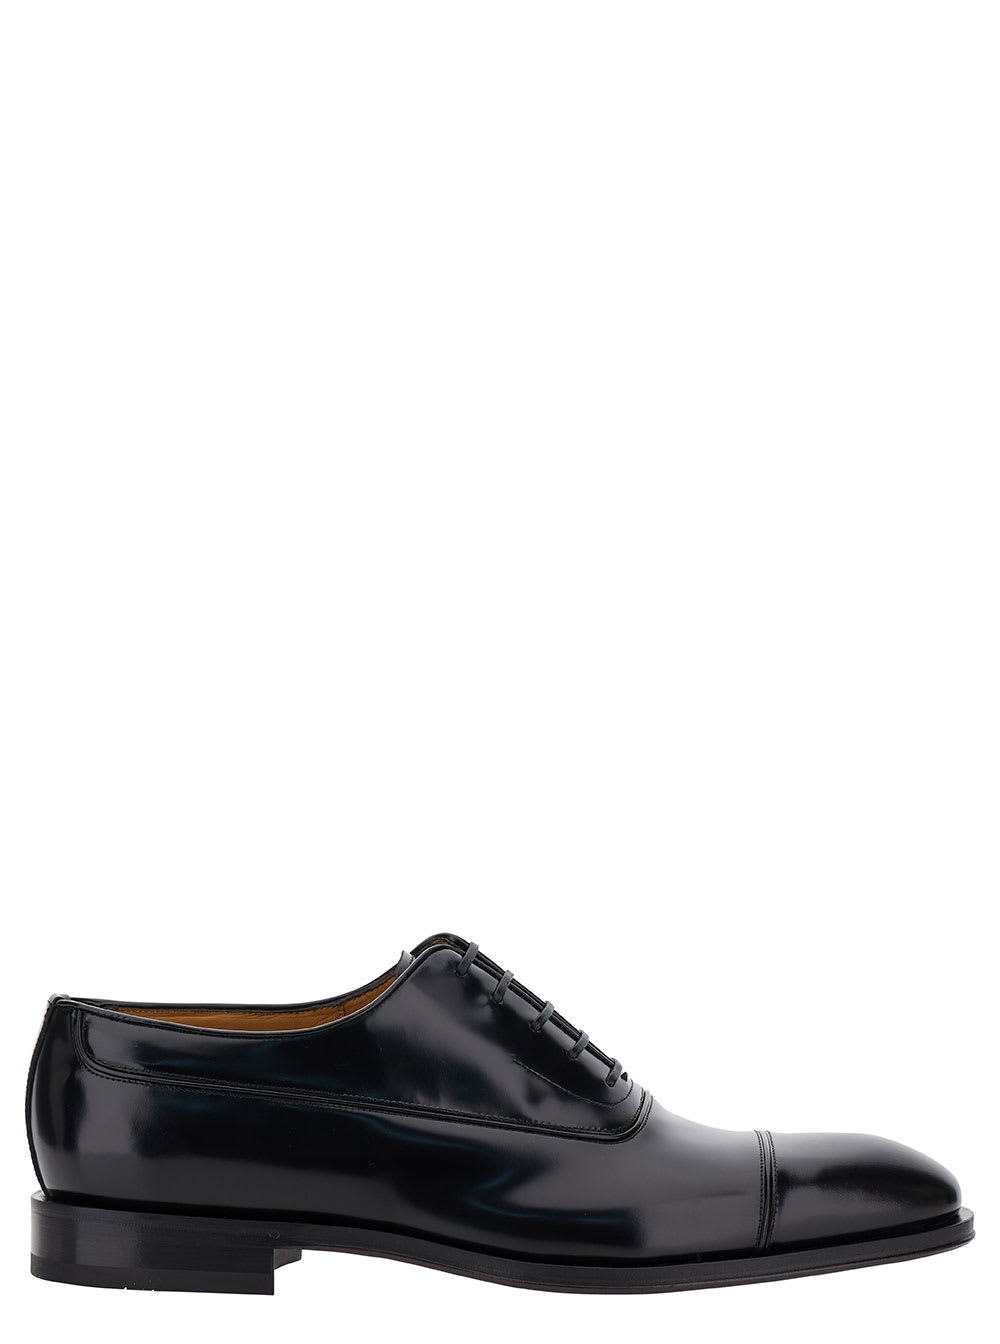 Oxford With Toe Cap